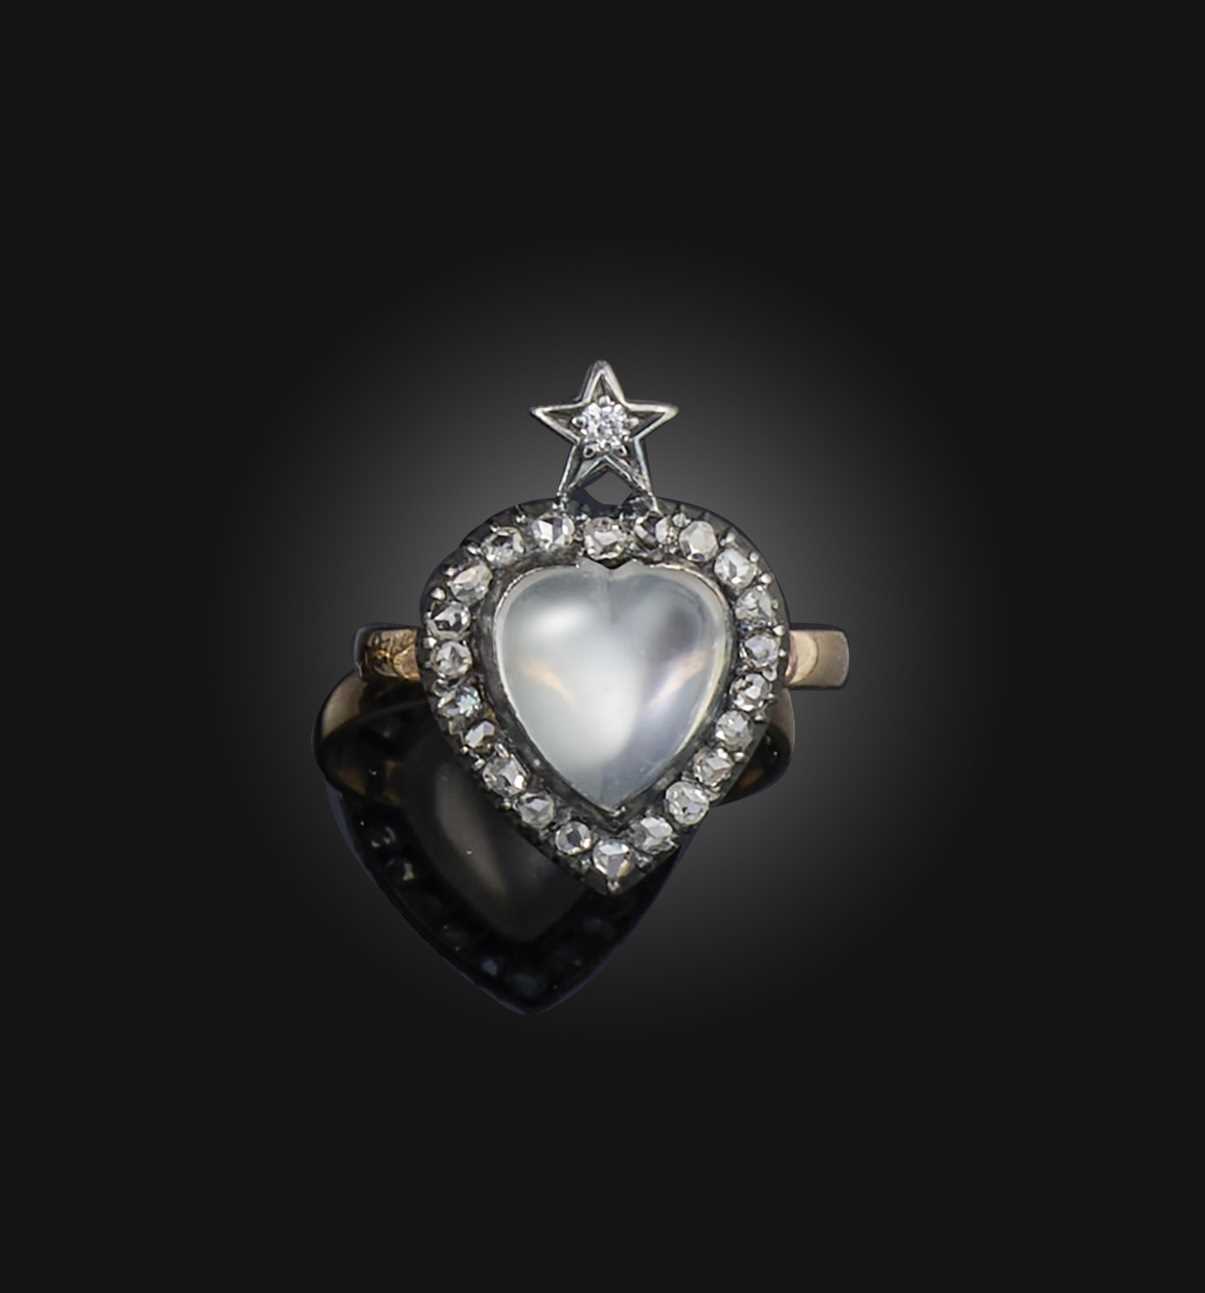 A moonstone and diamond ring, designed as a heart surmounted by a star, set with a polished heart-